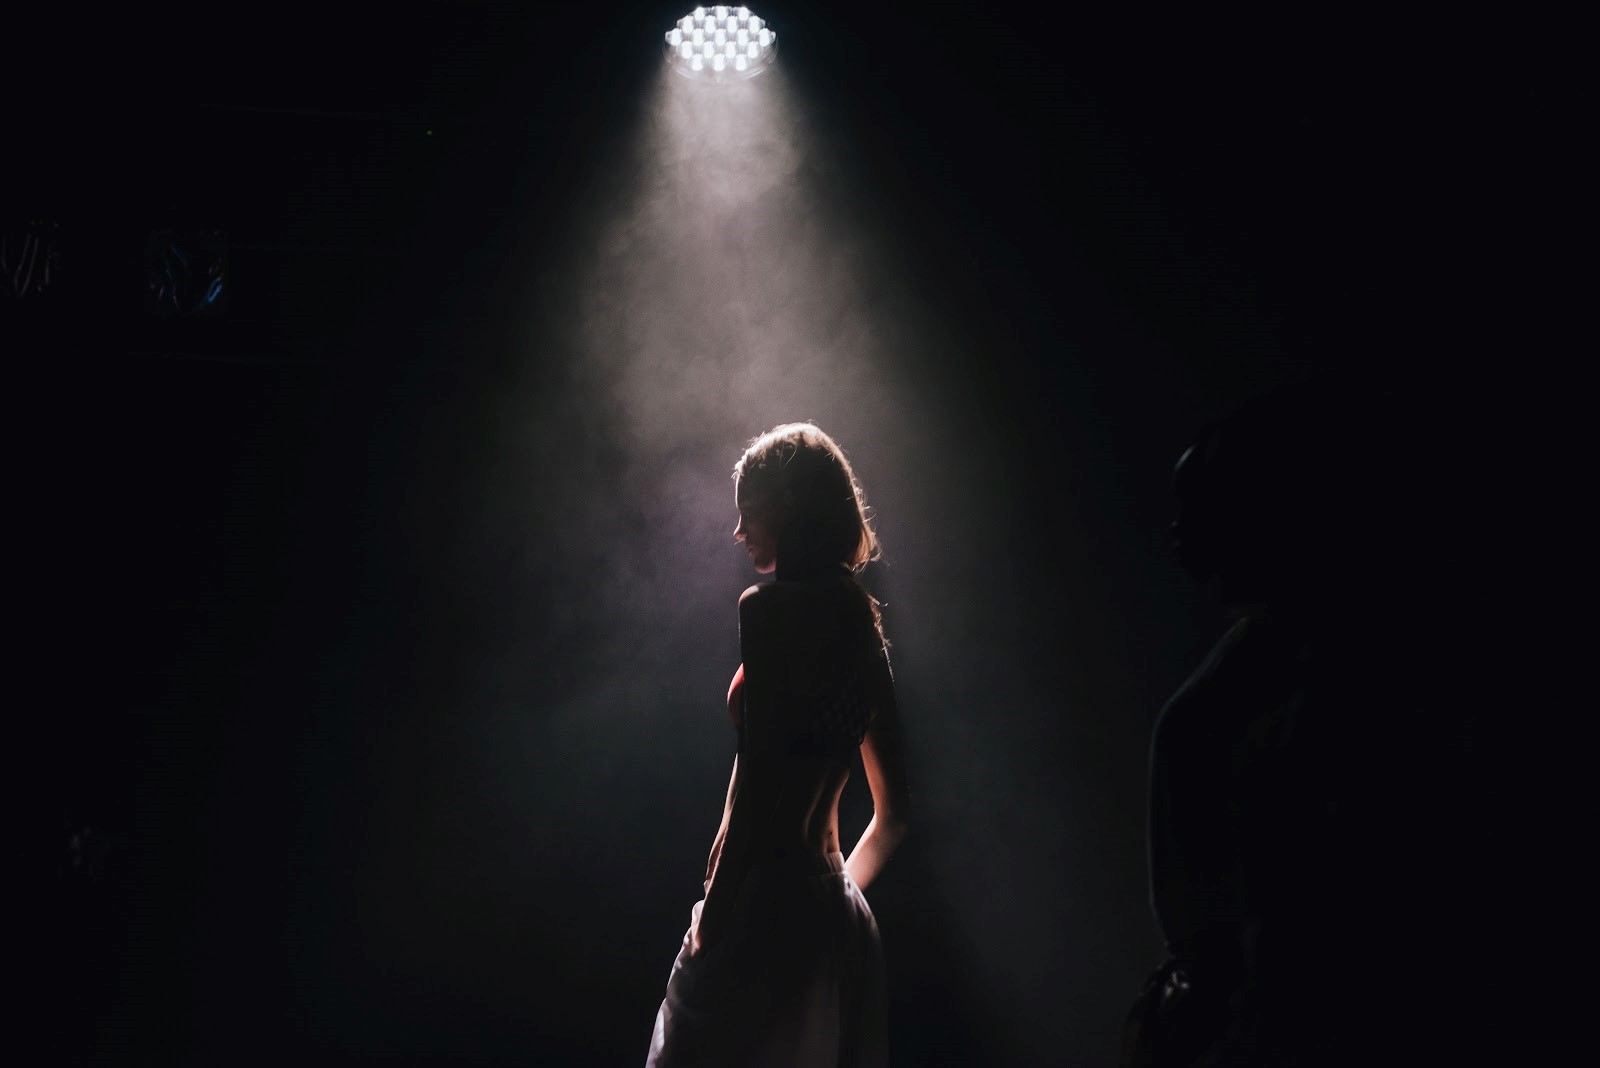 A woman in the spotlight on a stage